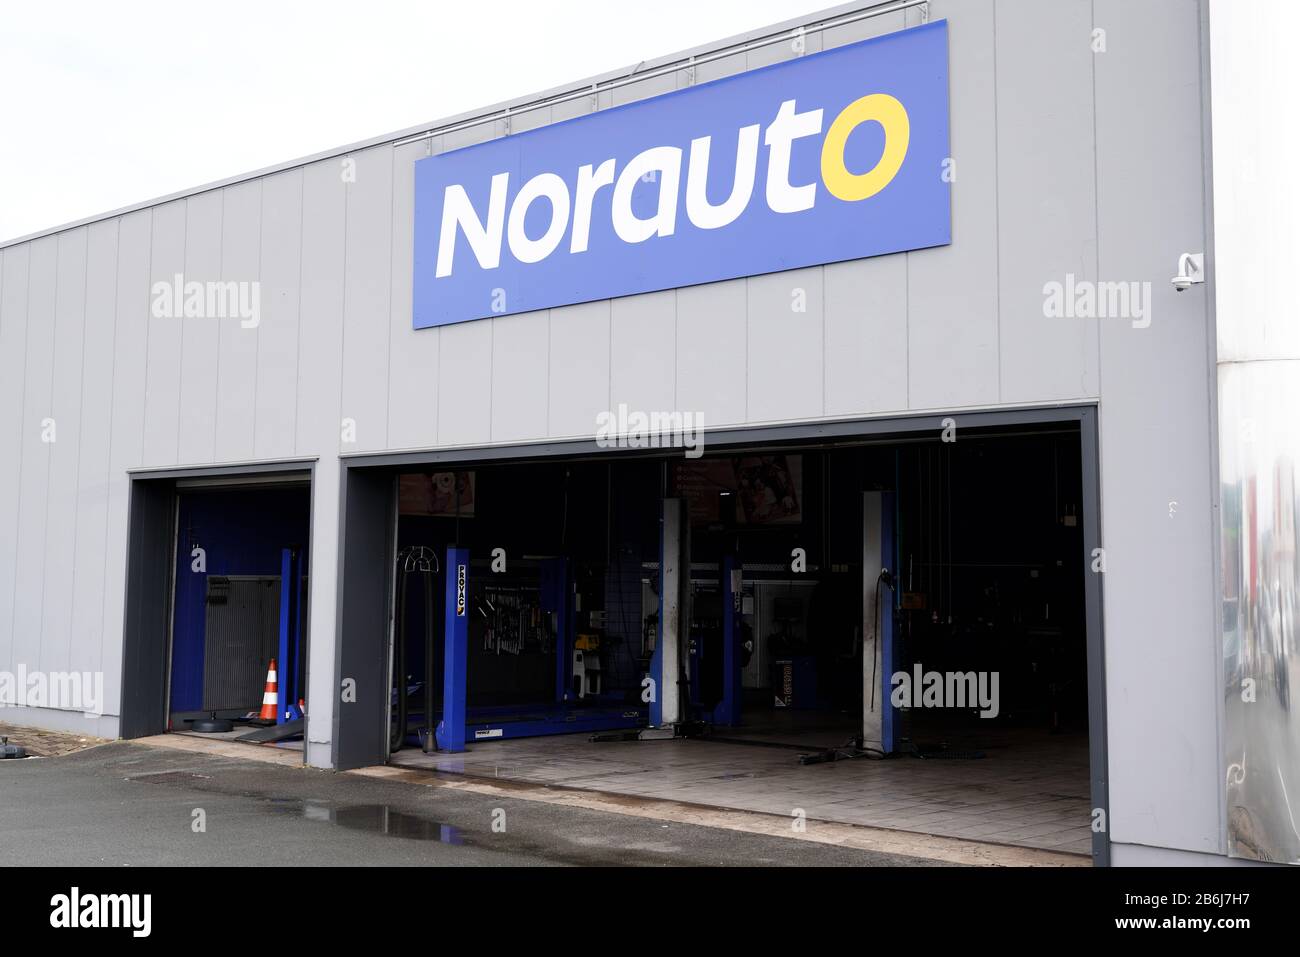 Bordeaux , Aquitaine / France - 09 24 2019 : Norauto logo French company car repairs accessories and parts shop store Stock Photo